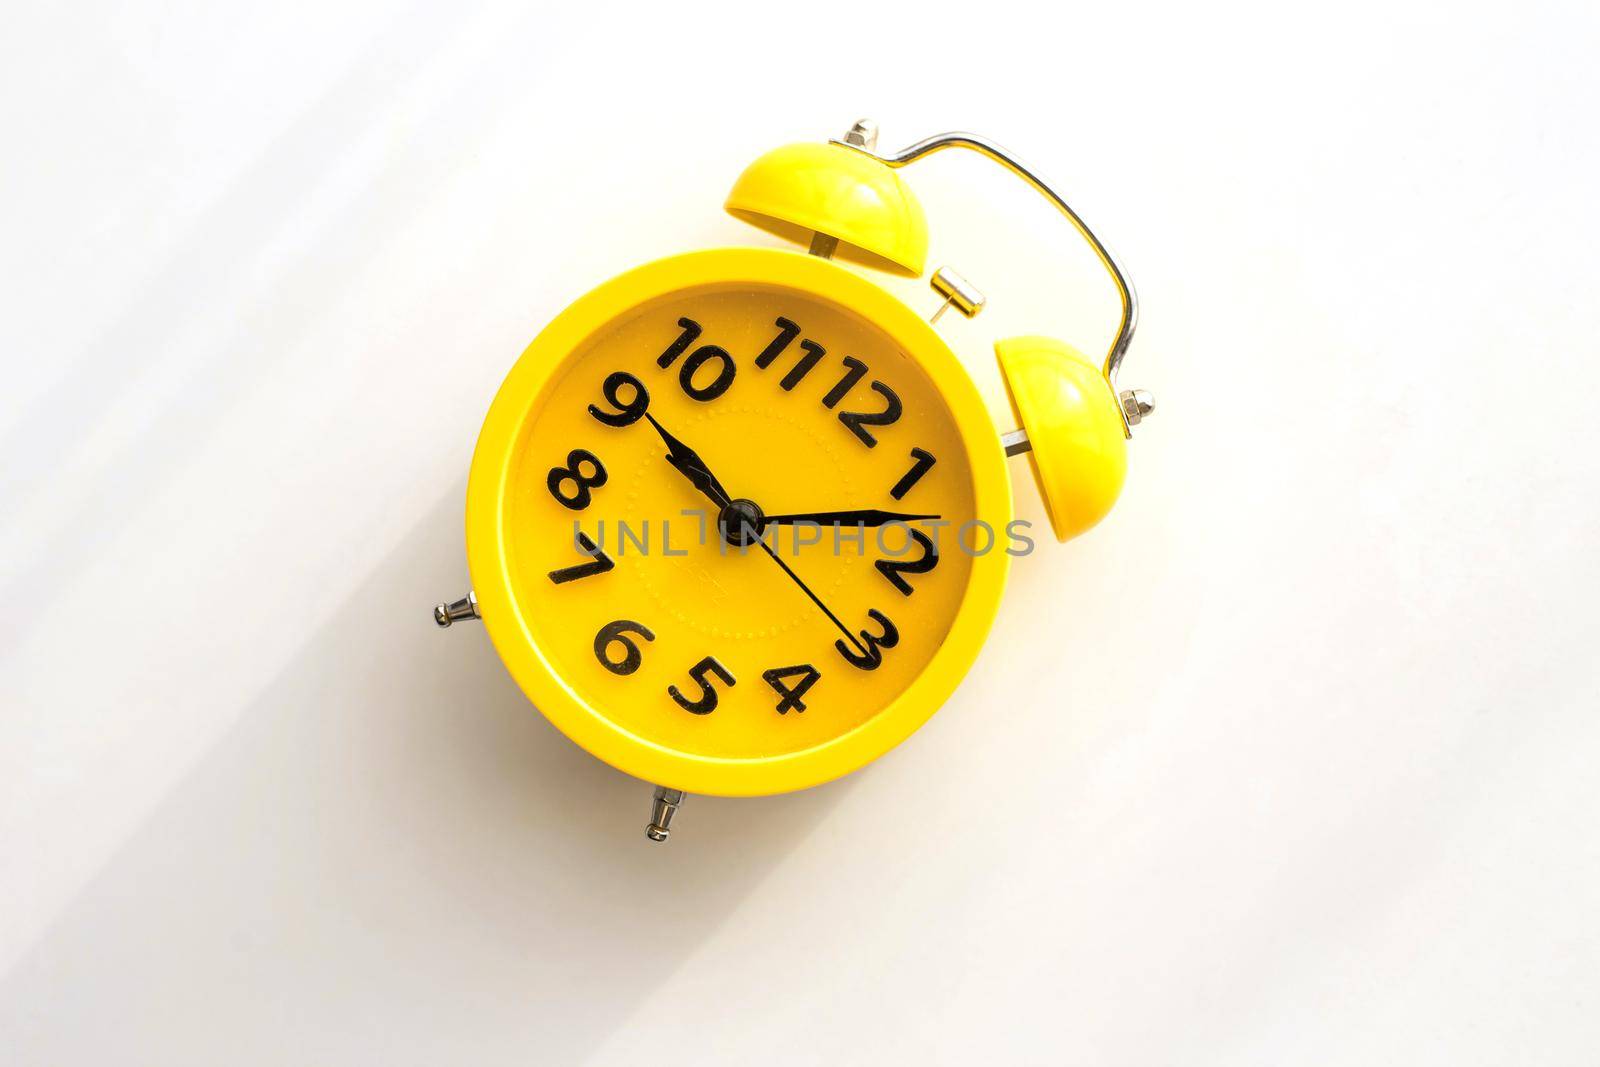 A yellow retro alarm clock with a black dial lies on a white table diagonally to the left. by Zakharova